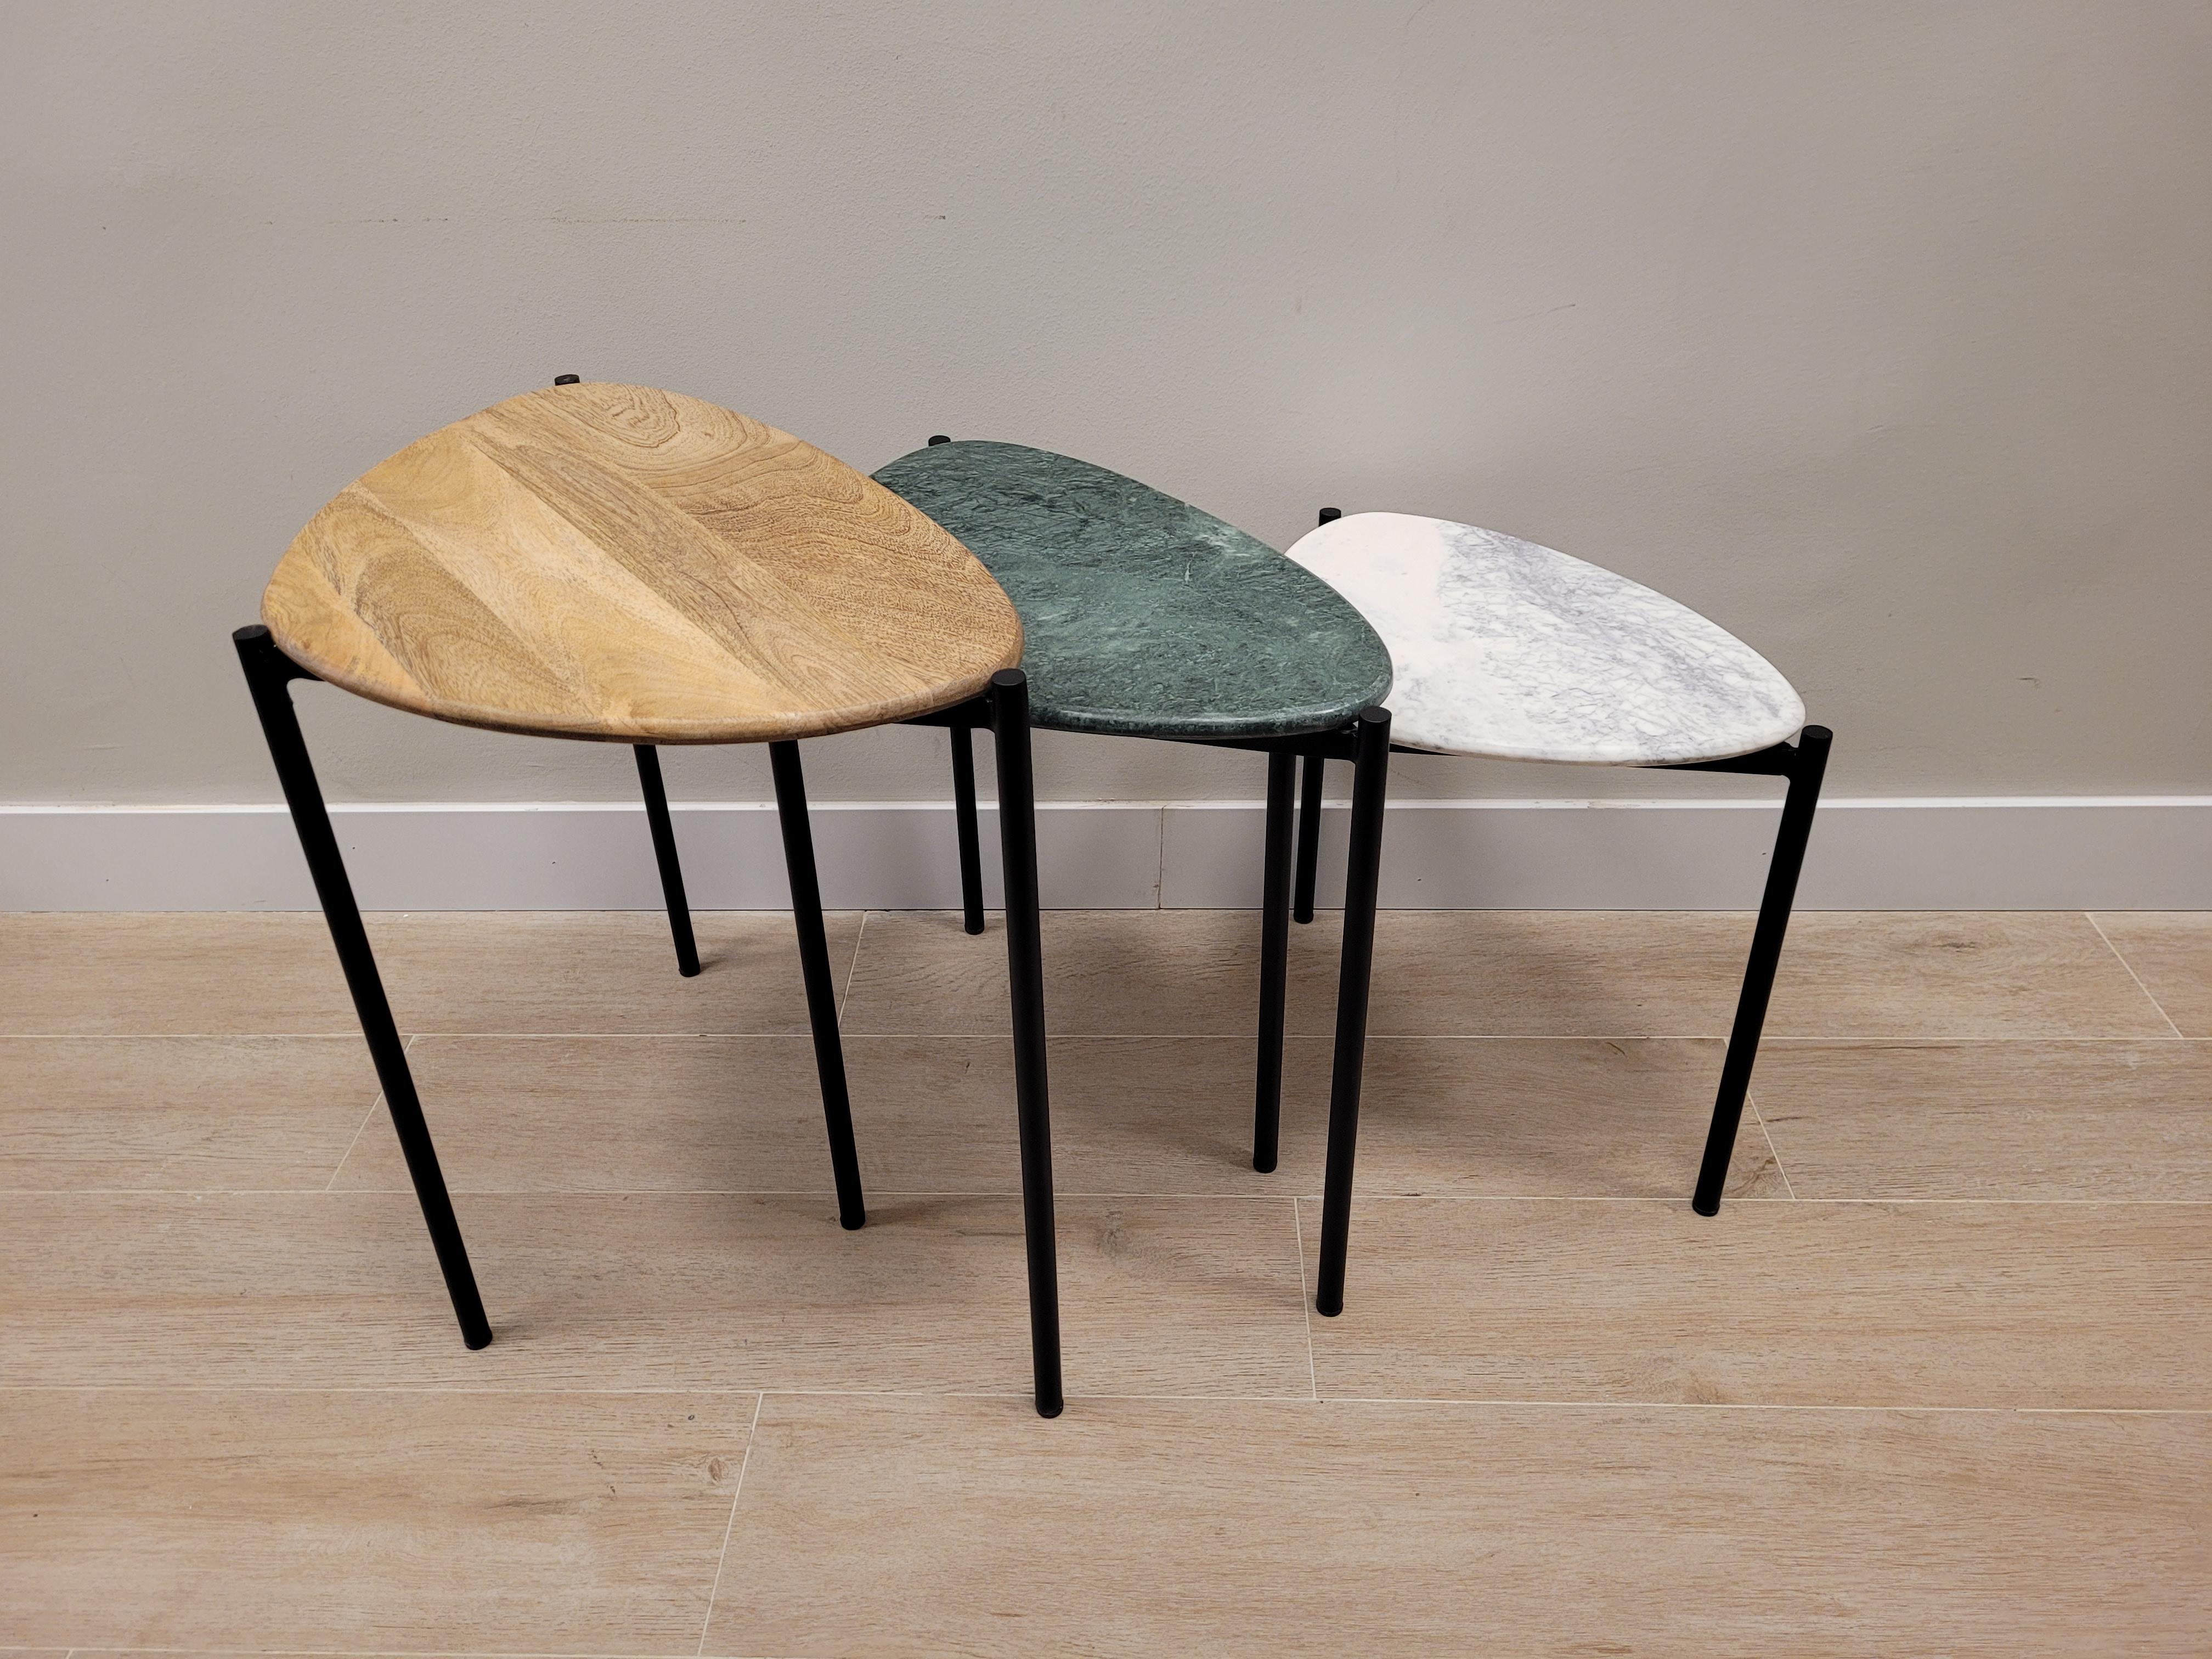 French Set of 3 End-Tables Green, White Marble and Wood 21st Century, Side Table For Sale